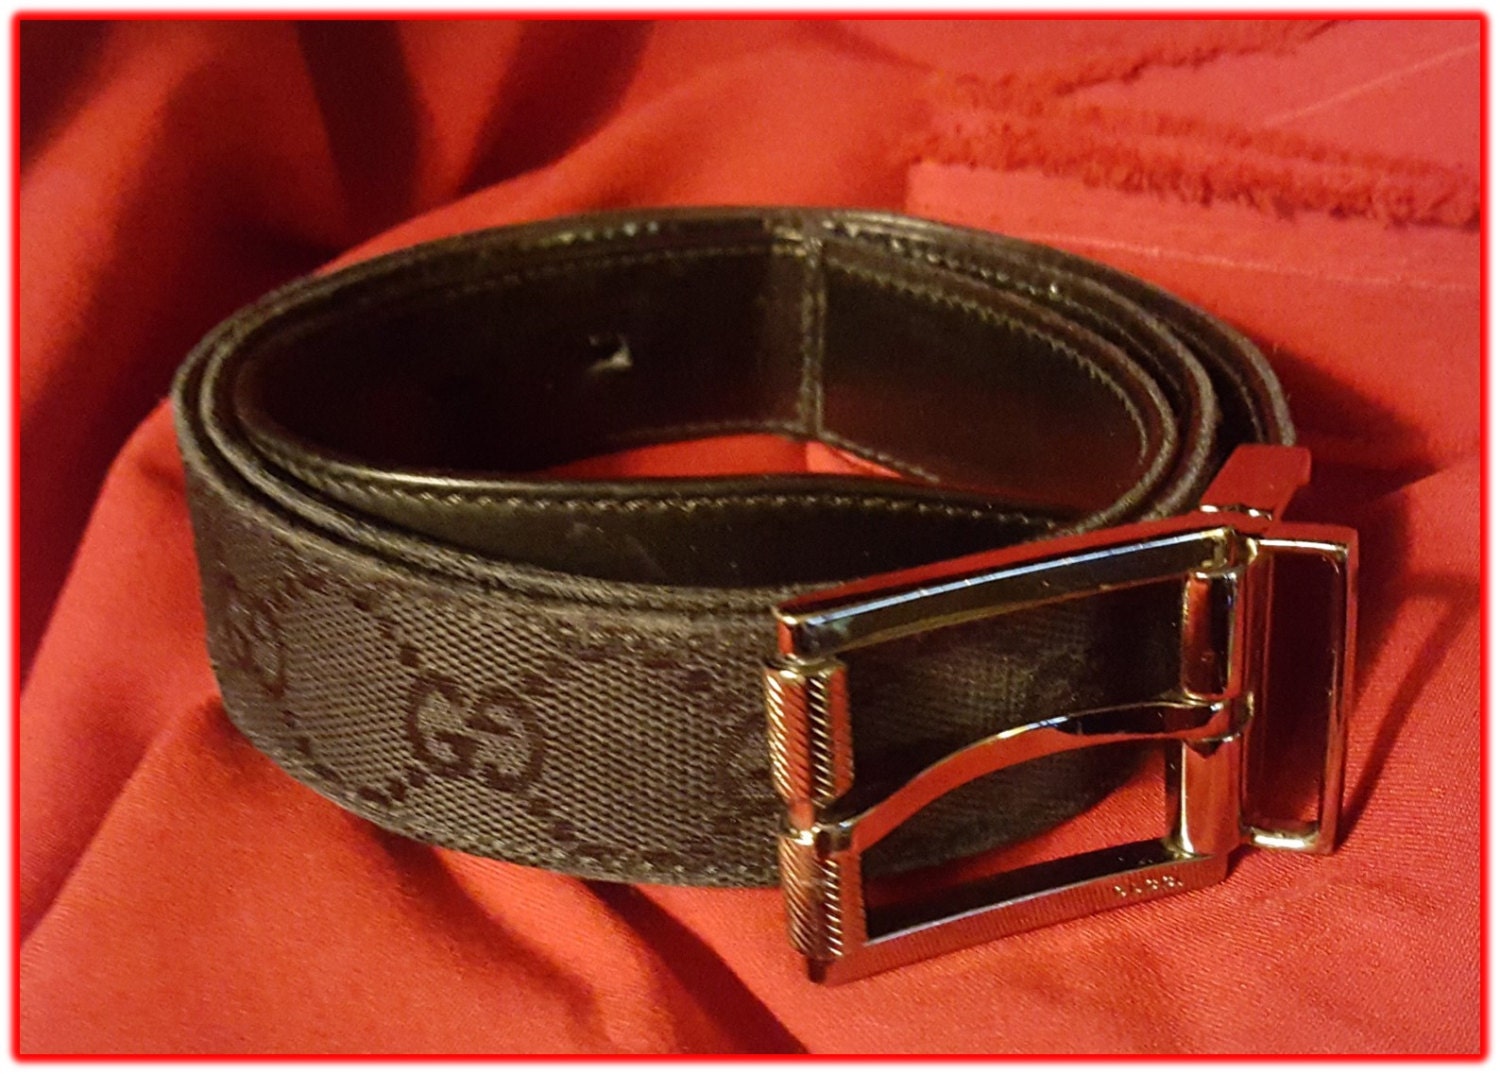 Black Gucci Belt with Silver Buckle Serial Number